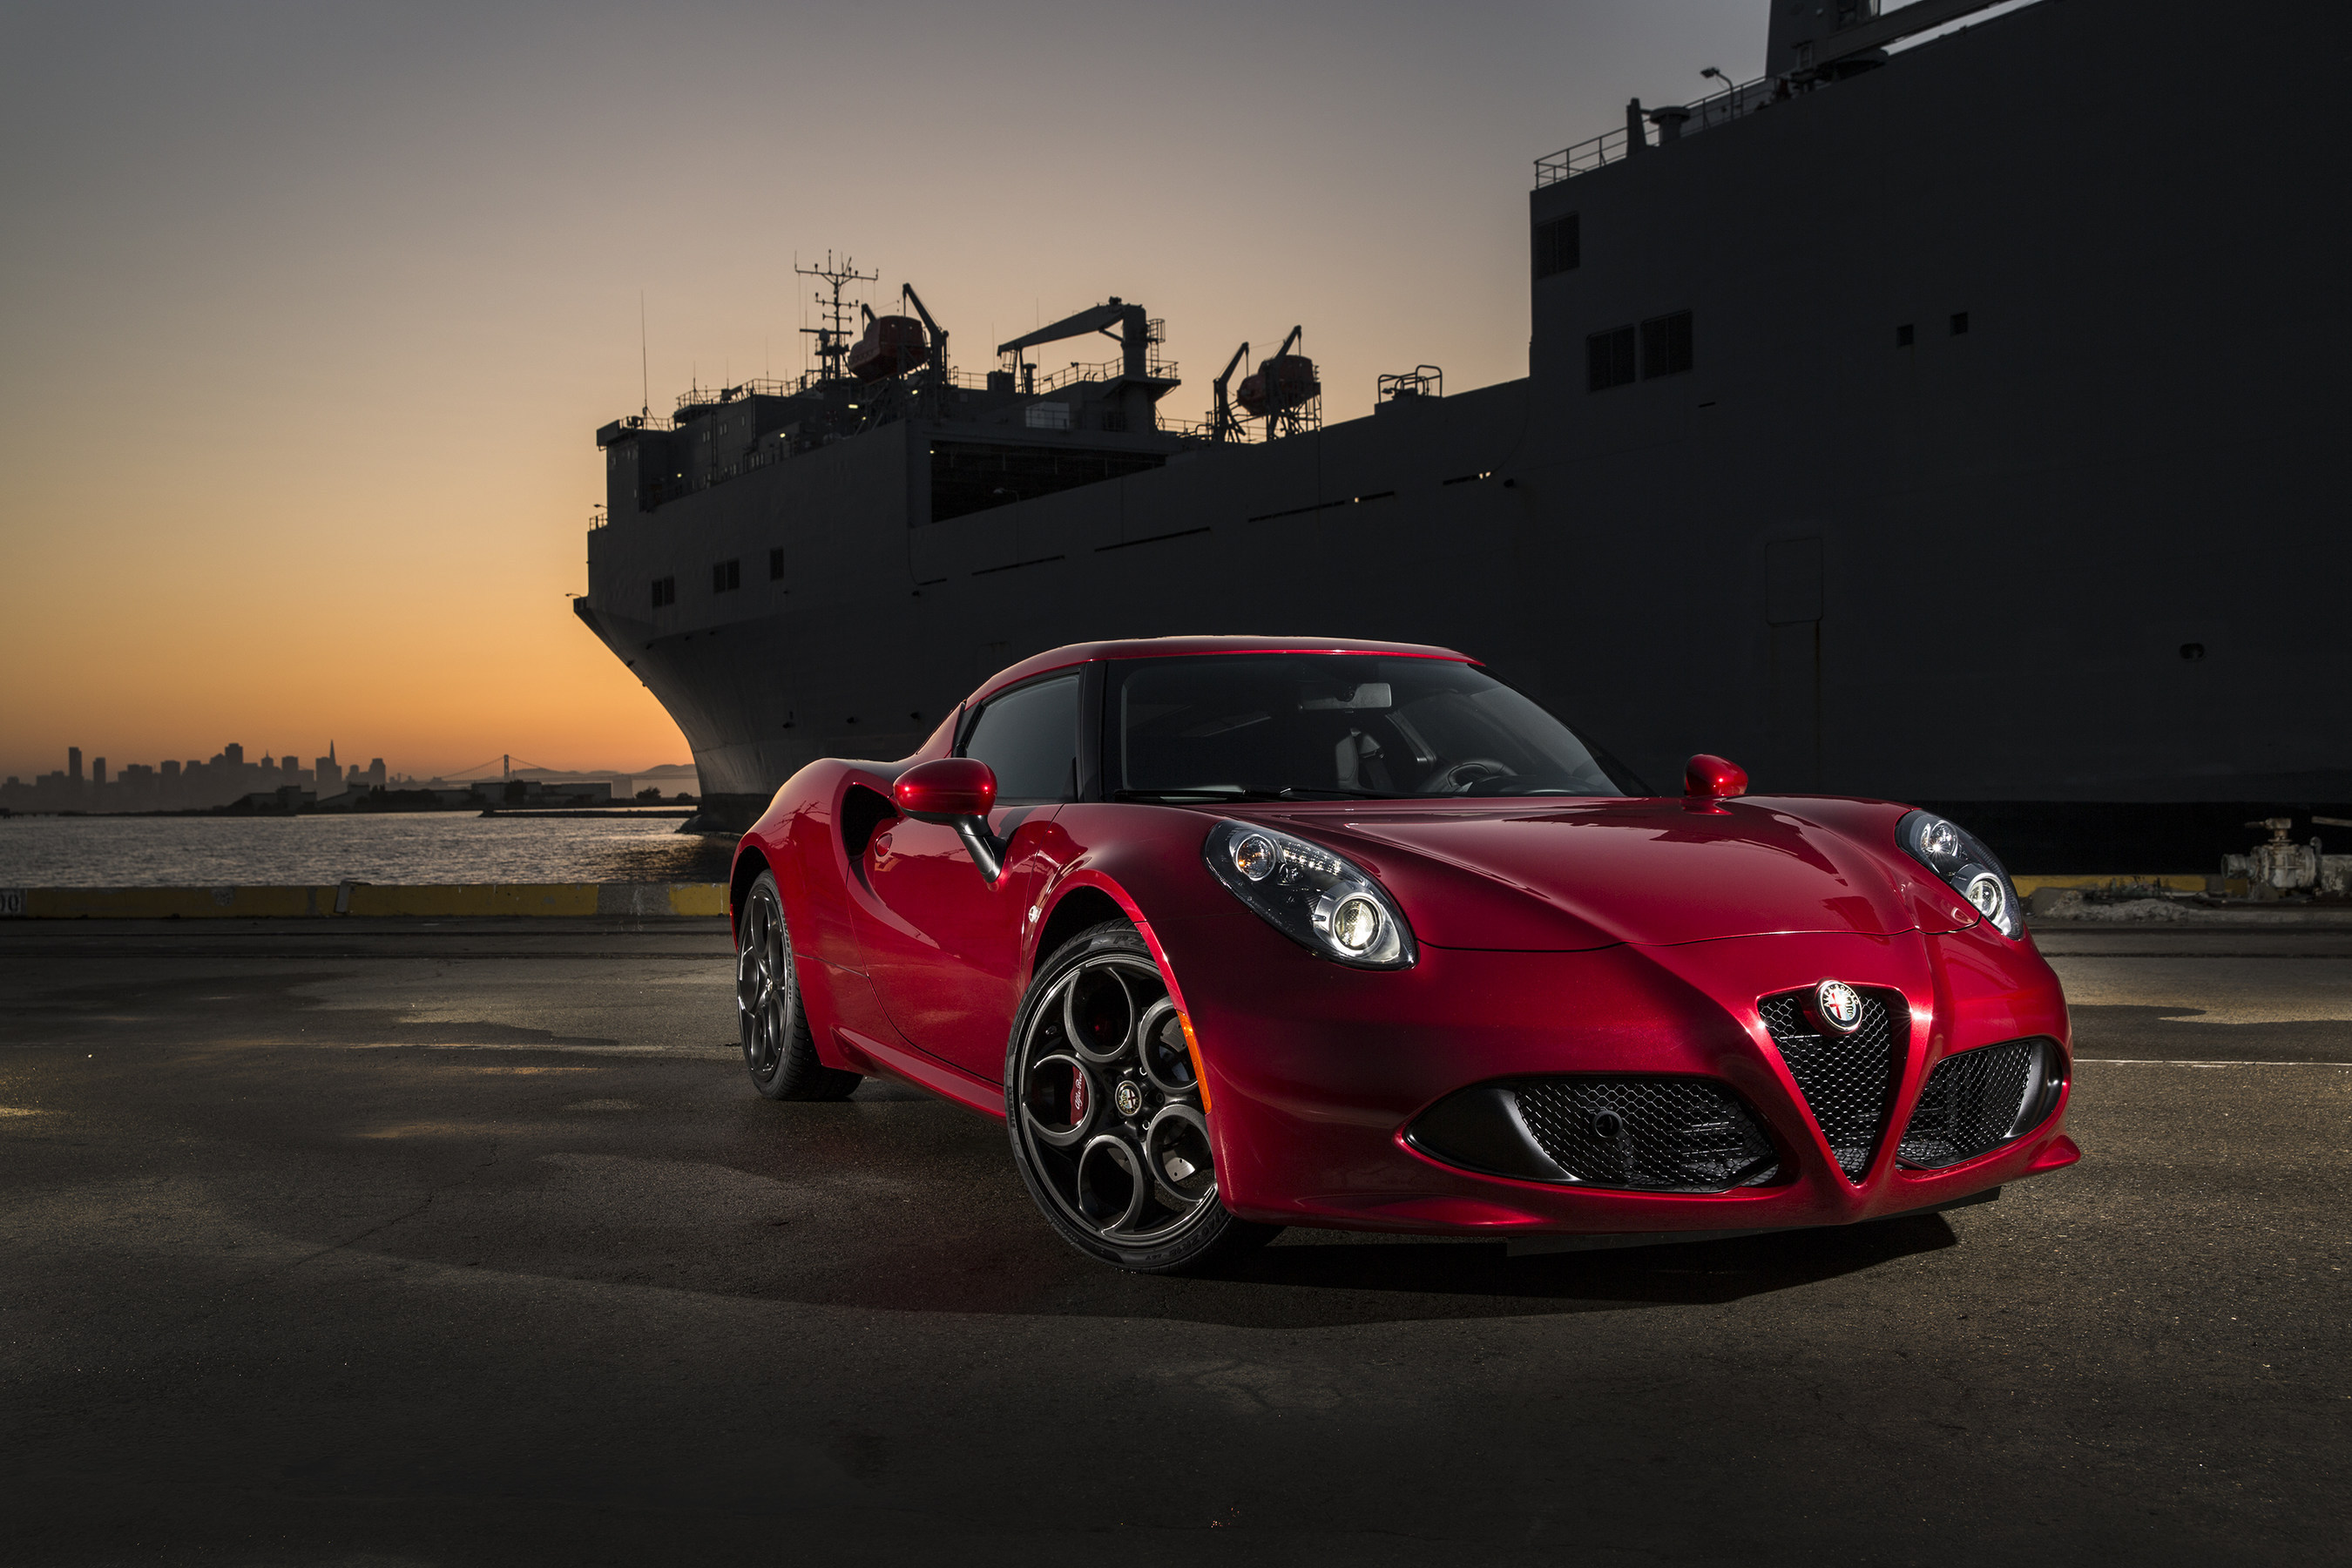 Playboy Magazine Names The All-New 2015 Alfa Romeo 4C As One of its '2015 Cars of the Year'